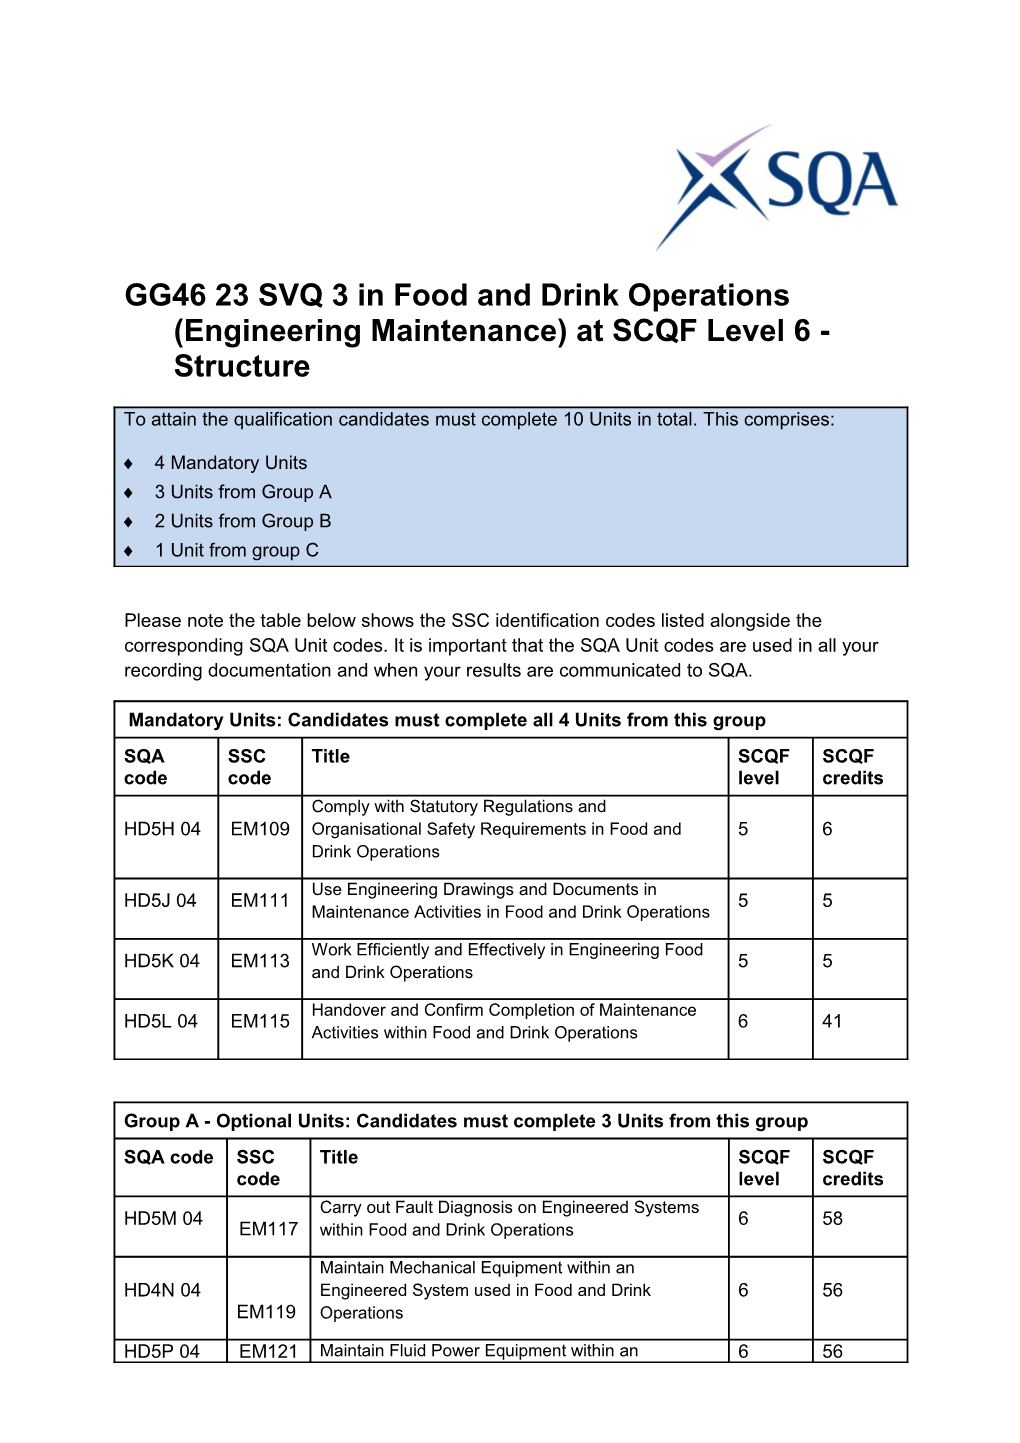 GG46 23 SVQ 3 in Food and Drink Operations (Engineering Maintenance) at SCQF Level 6 - Structure